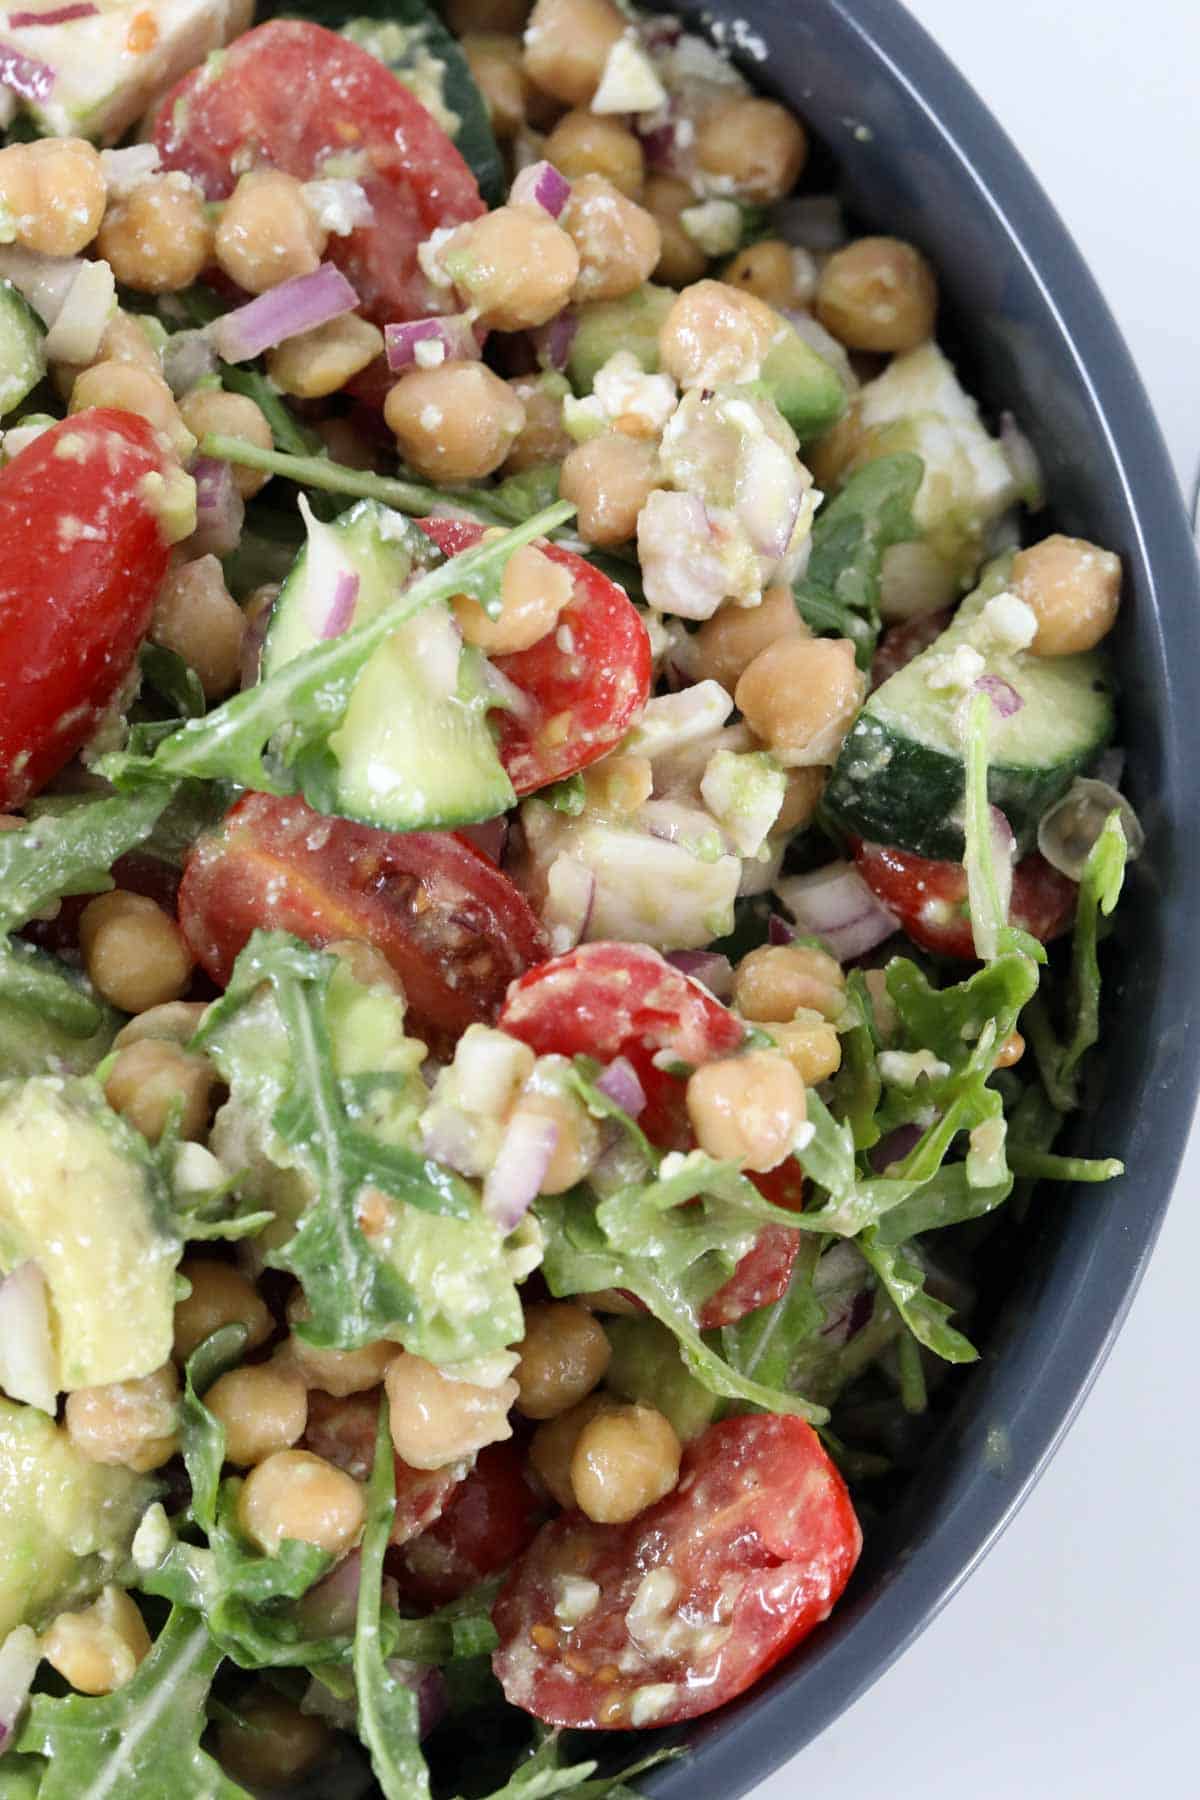 A bowl of chickpea salad ready to serve.